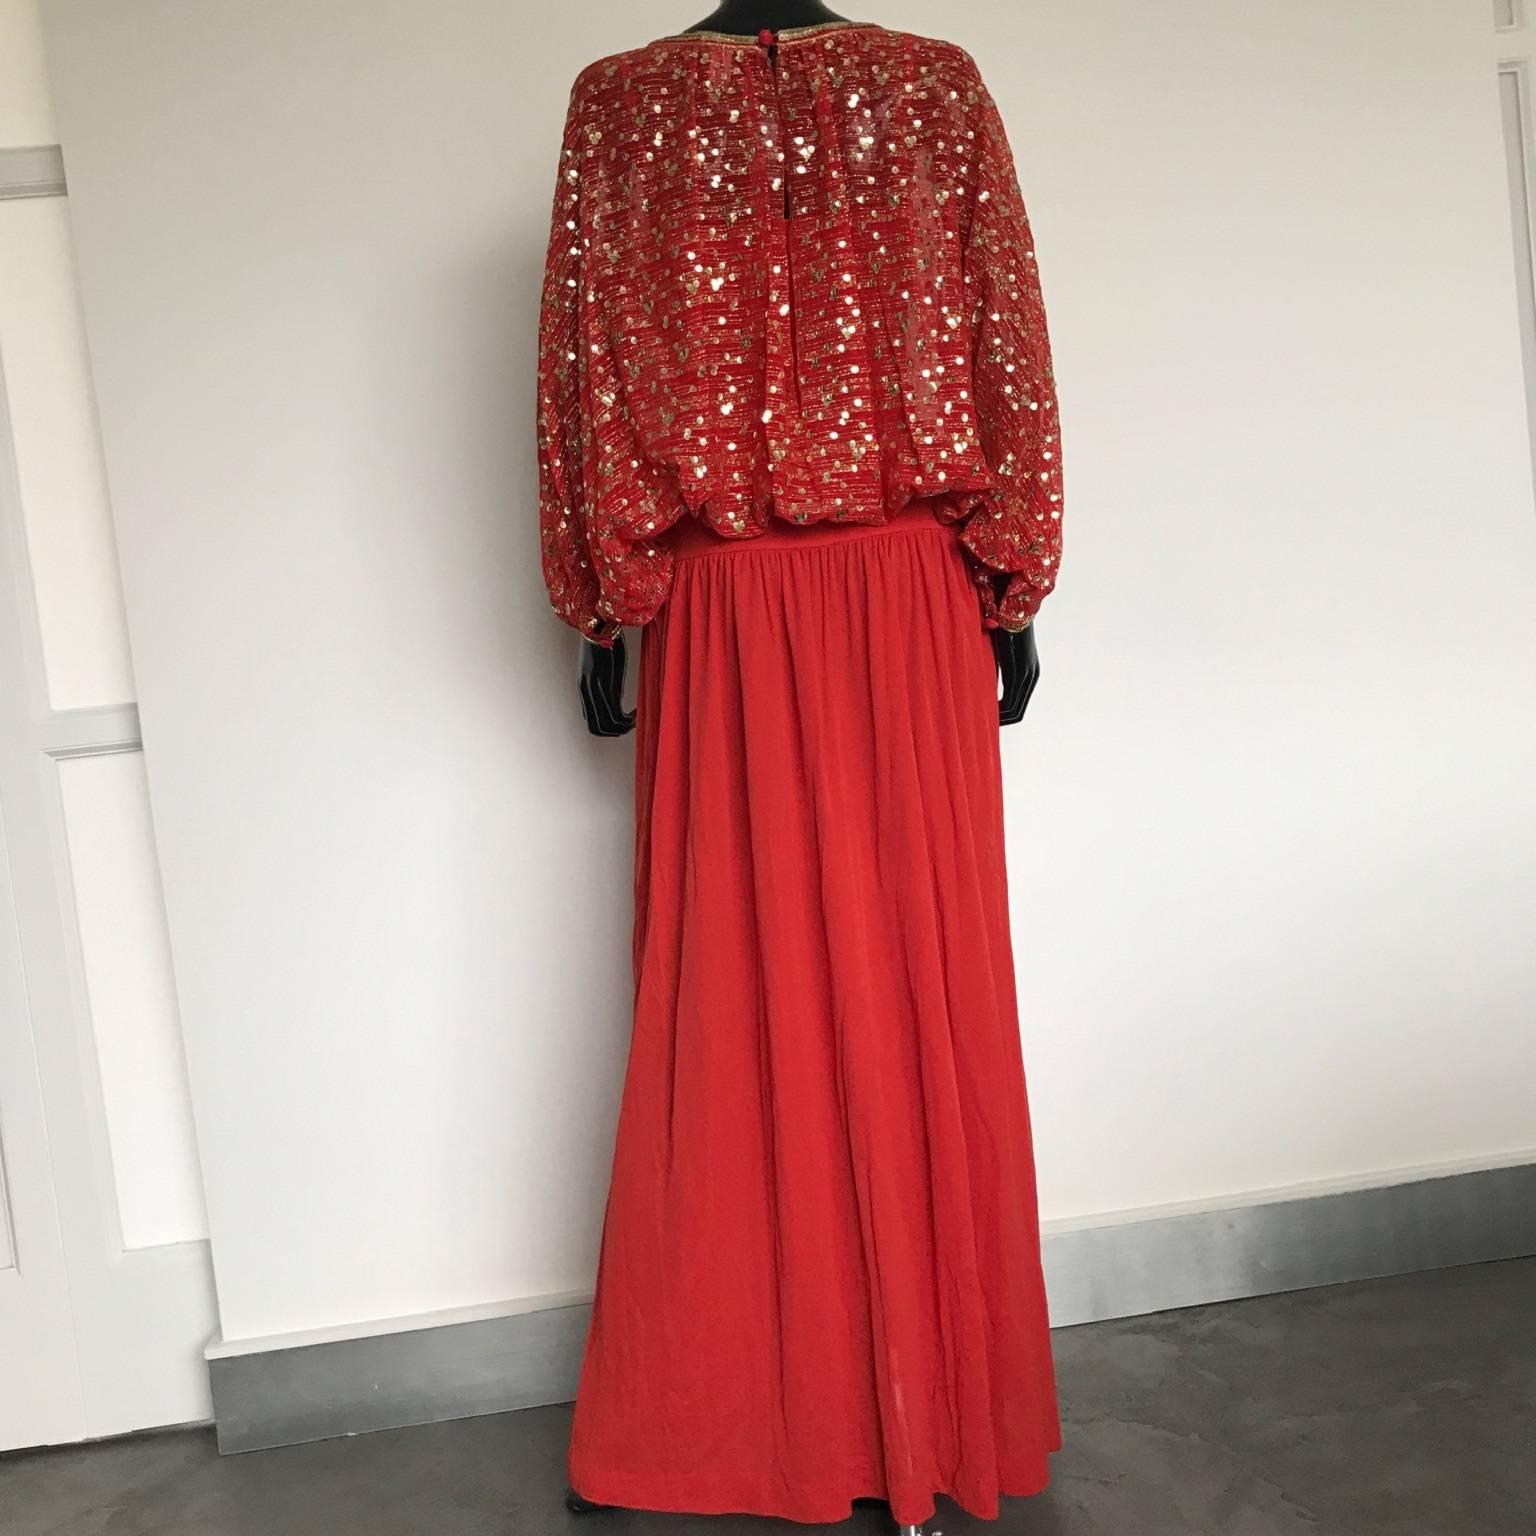 CHRISTIAN DIOR outfit, circa 1980.
This cocktail outfit was created by Marc Bohan, at the head of the artistic direction at that period.
Outfit, made of one dress and one blouse.
The two pieces can be worn separately.
